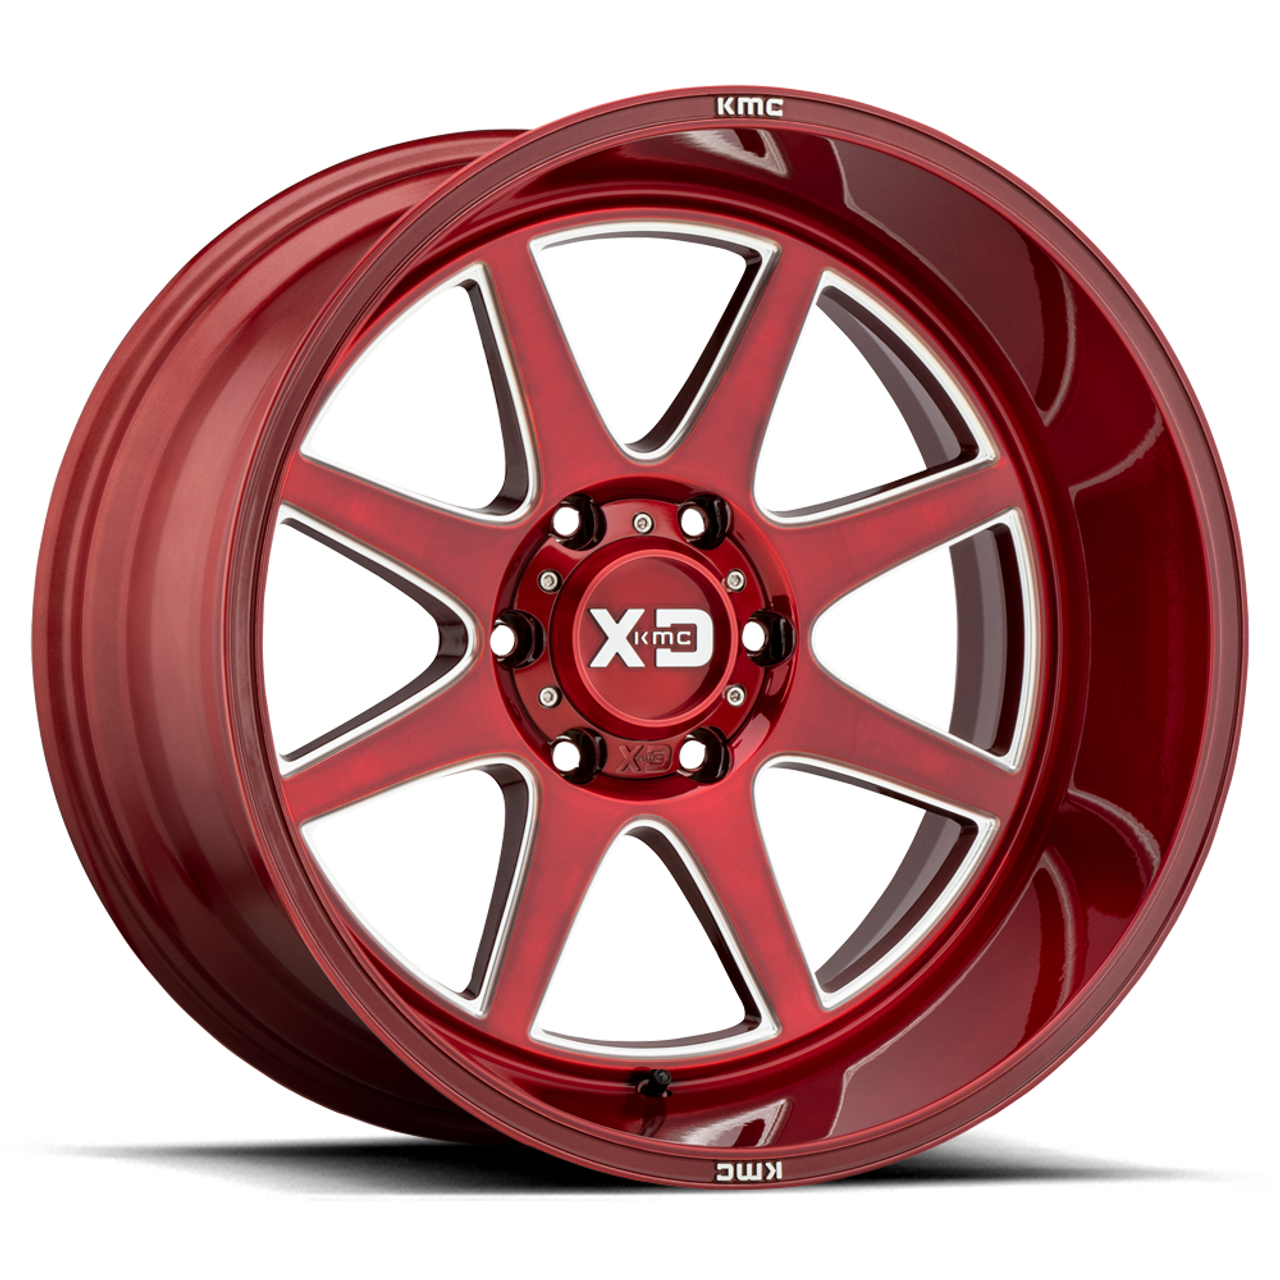 XD XD844 Pike 20x10 8x6.5 Brushed Red With Milled Accent Wheel 20" -18mm Rim